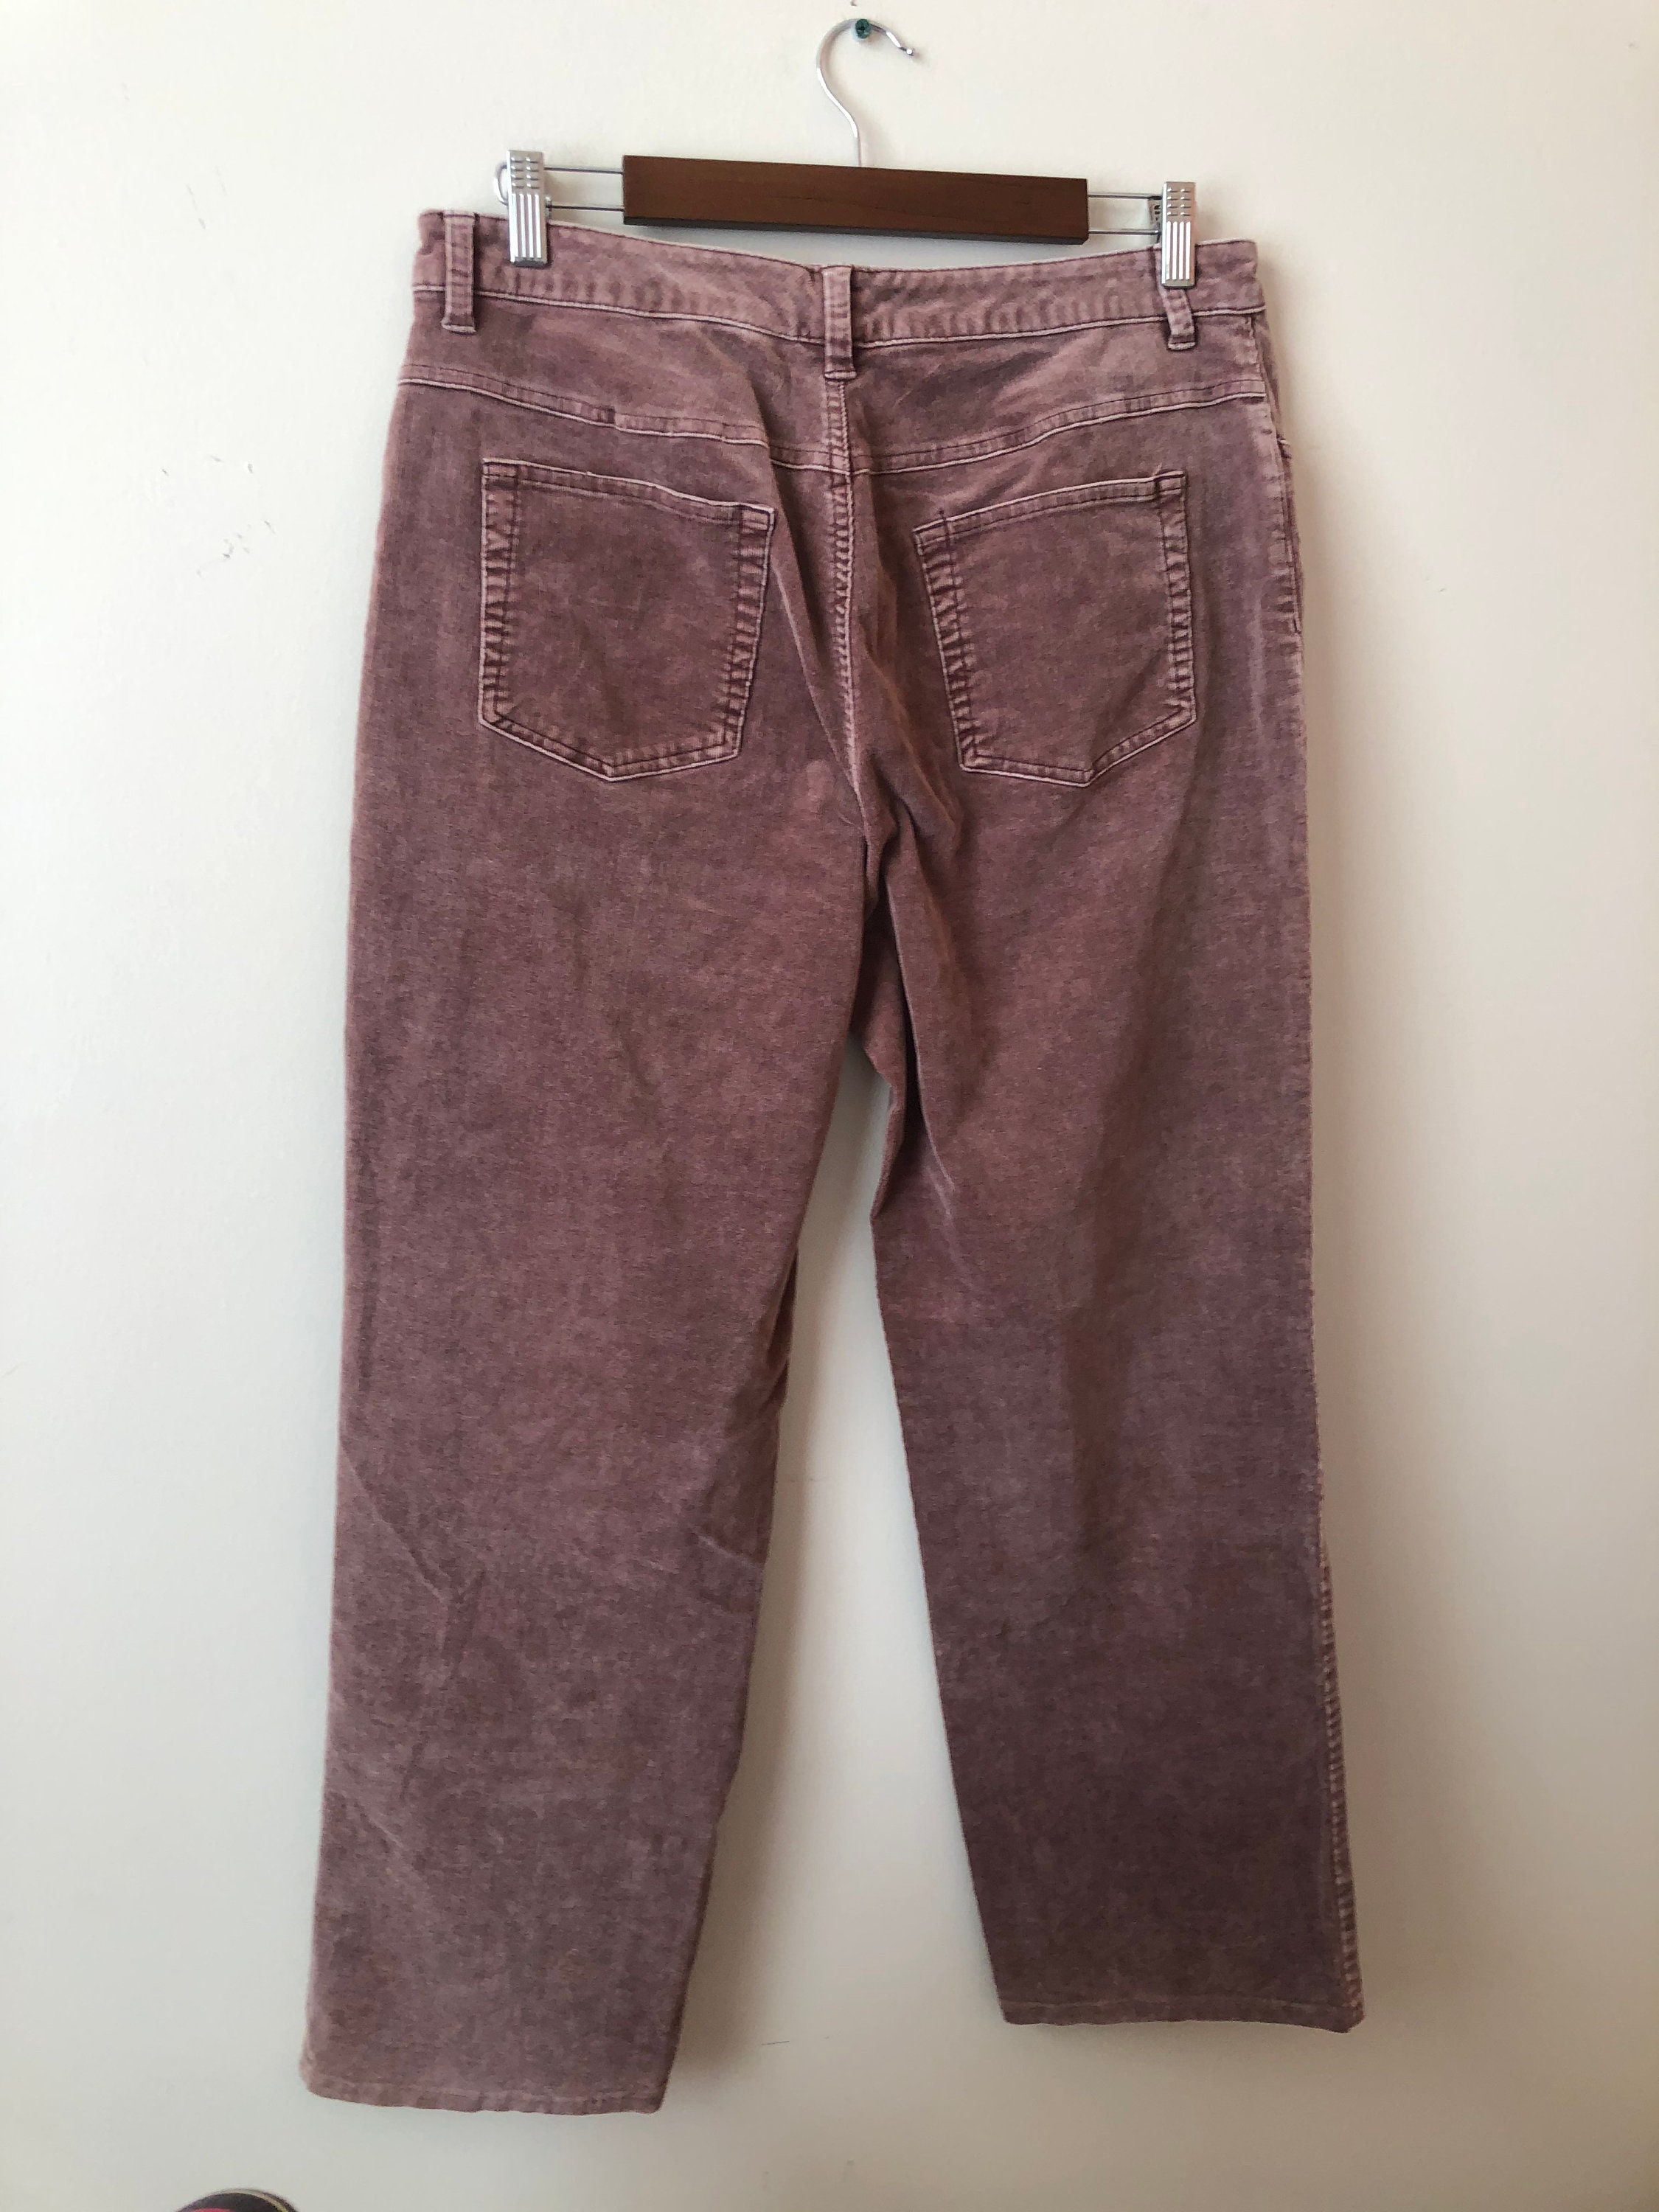 Pink corduroy pants / size 14 / stretch mid/high rise | Etsy